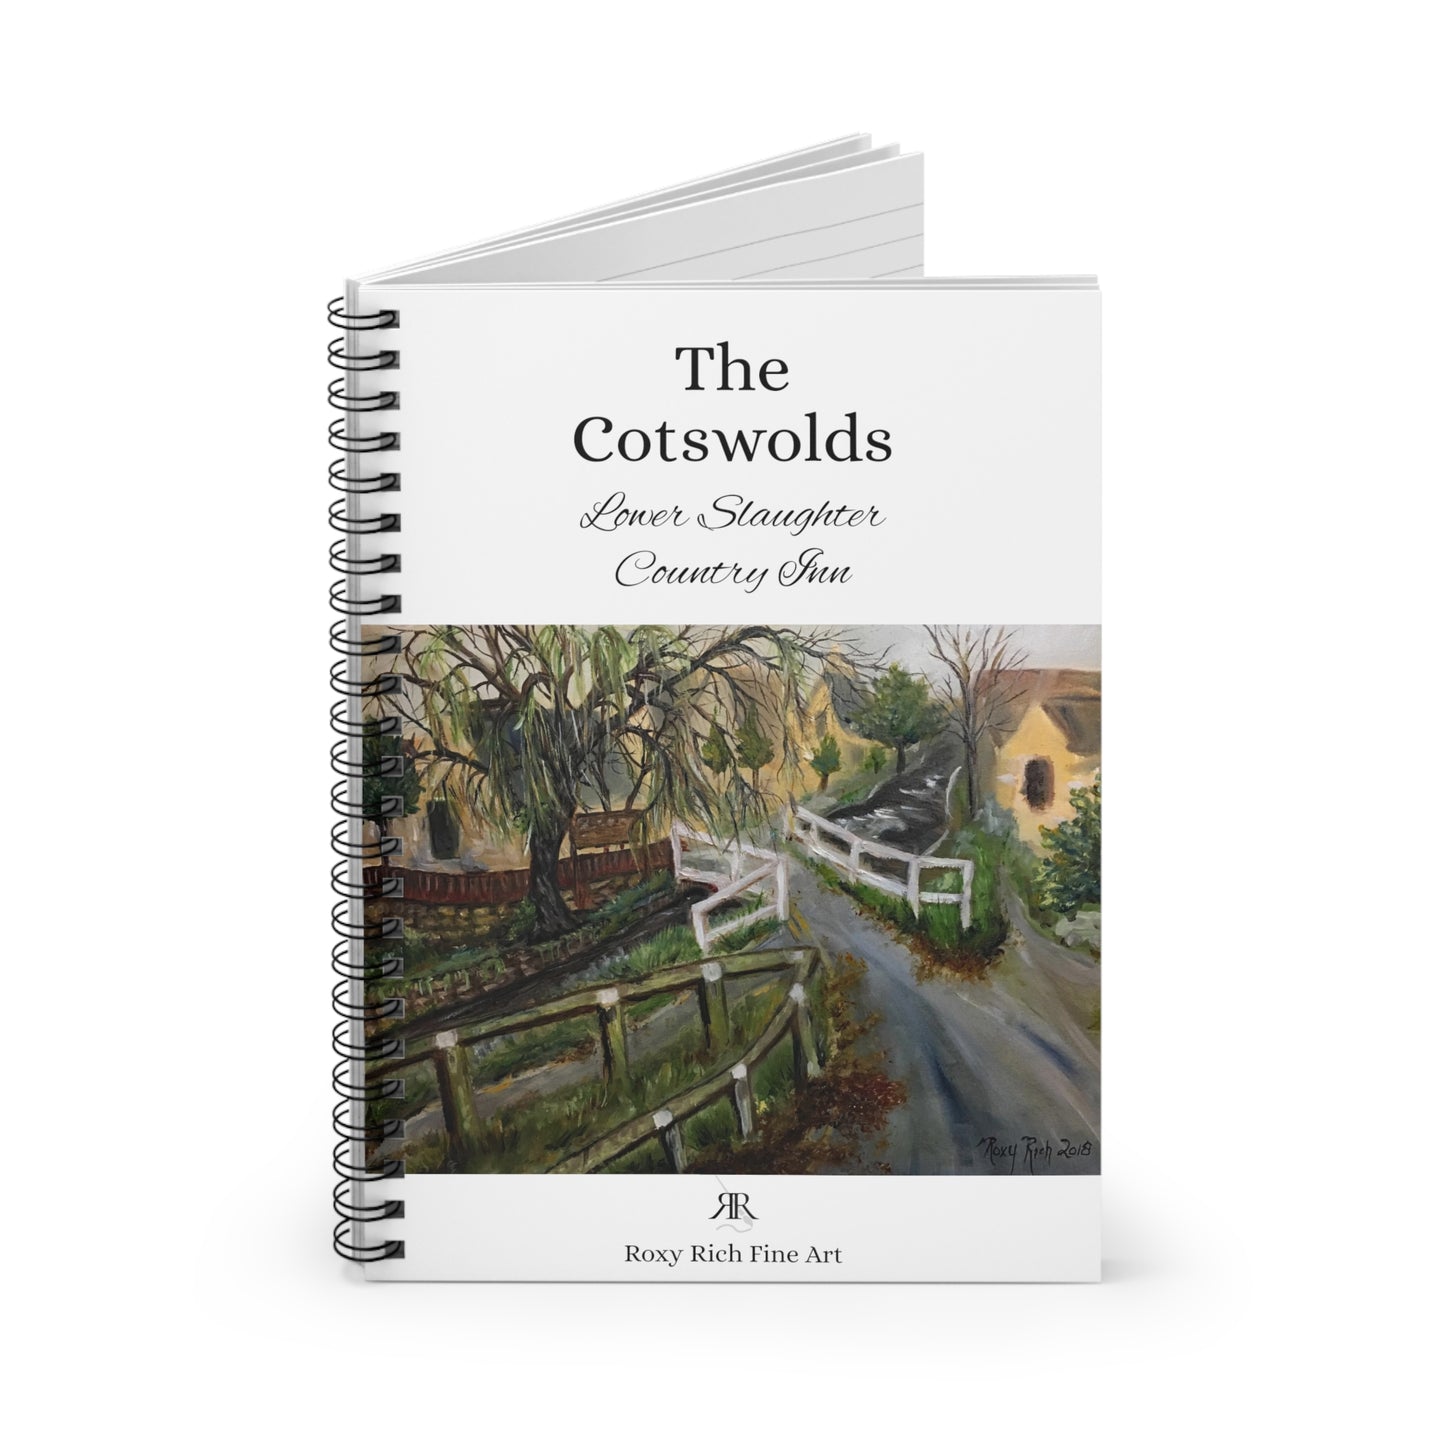 Lower Slaughter Country Inn "Los Cotswolds" Cuaderno de espiral